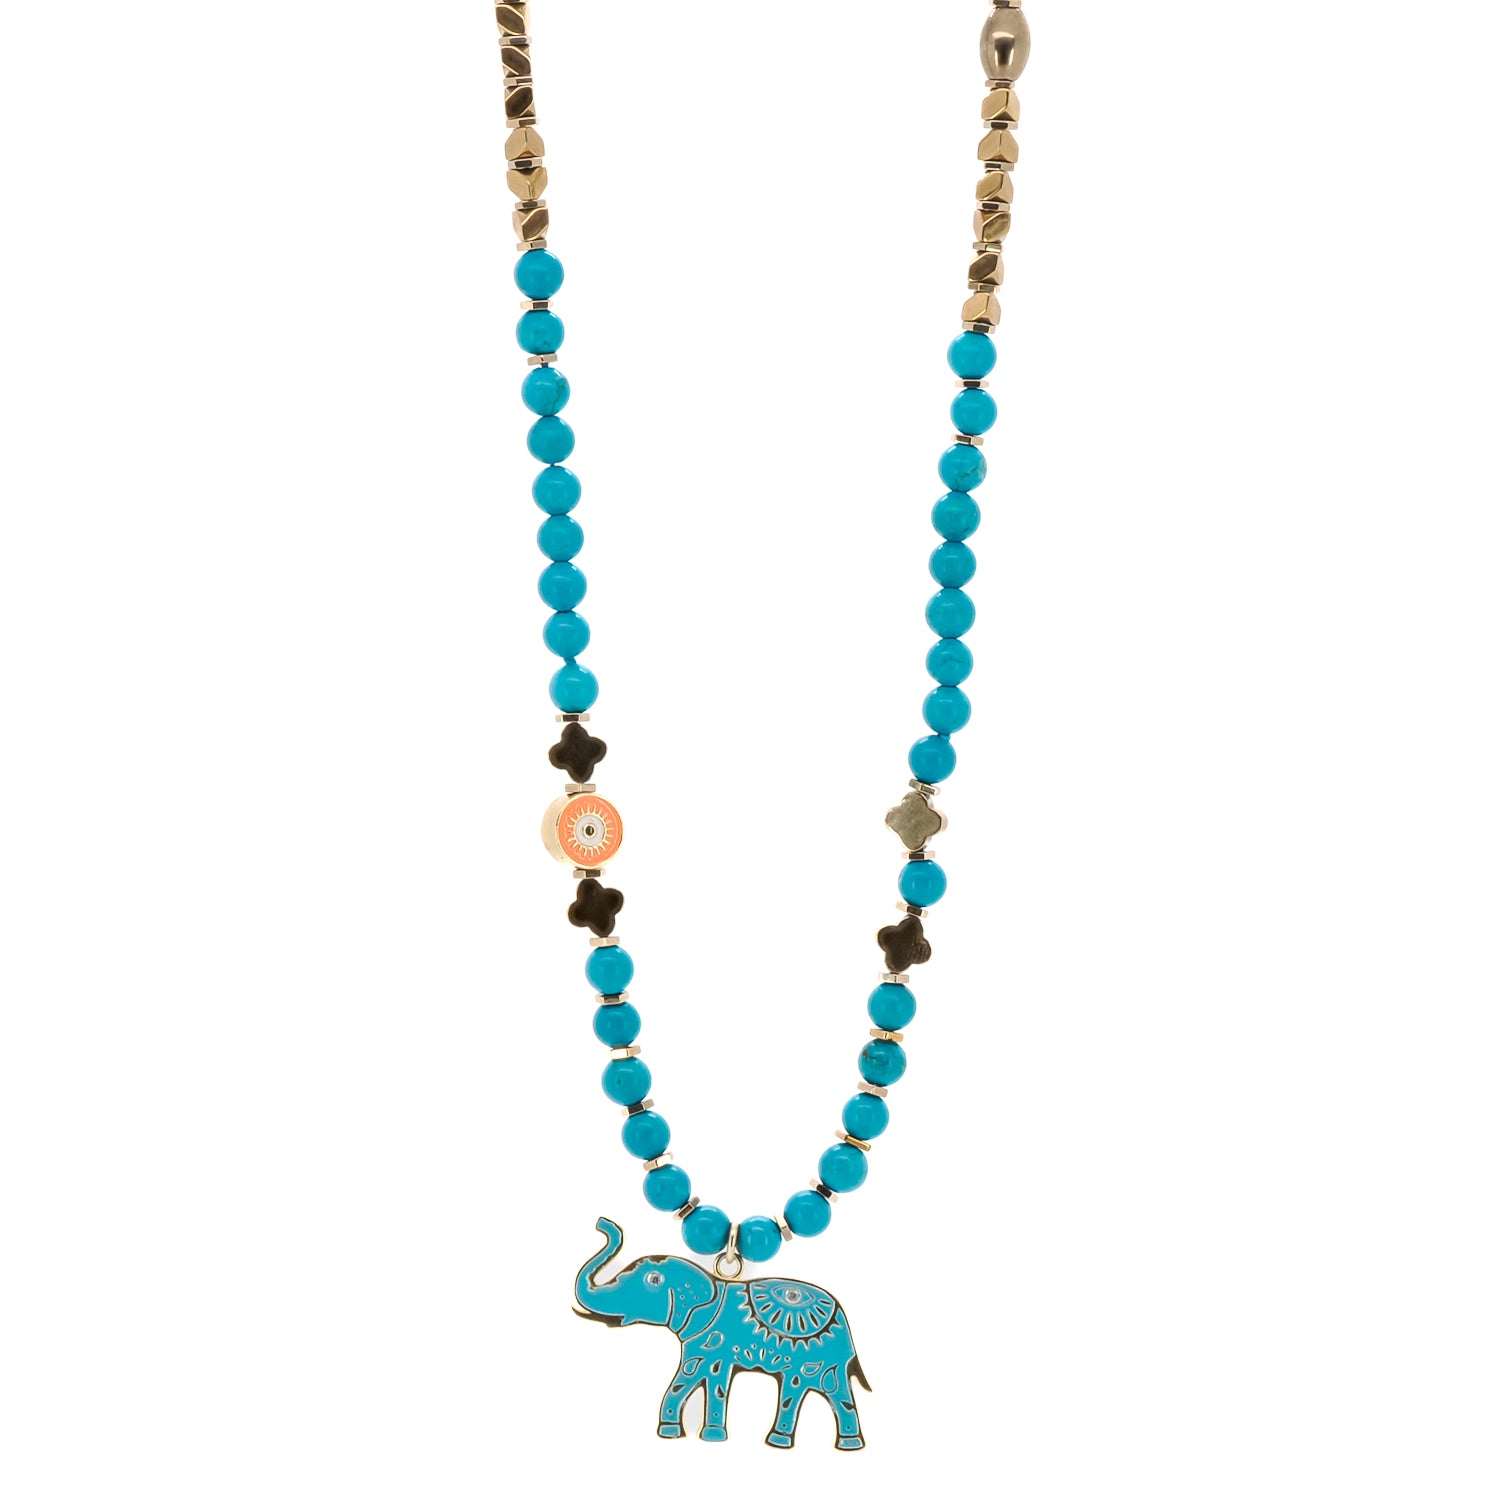 The intricate bronze symbol bead featuring an elephant, hamsa, and evil eye on the Turquoise Blue Elephant Necklace